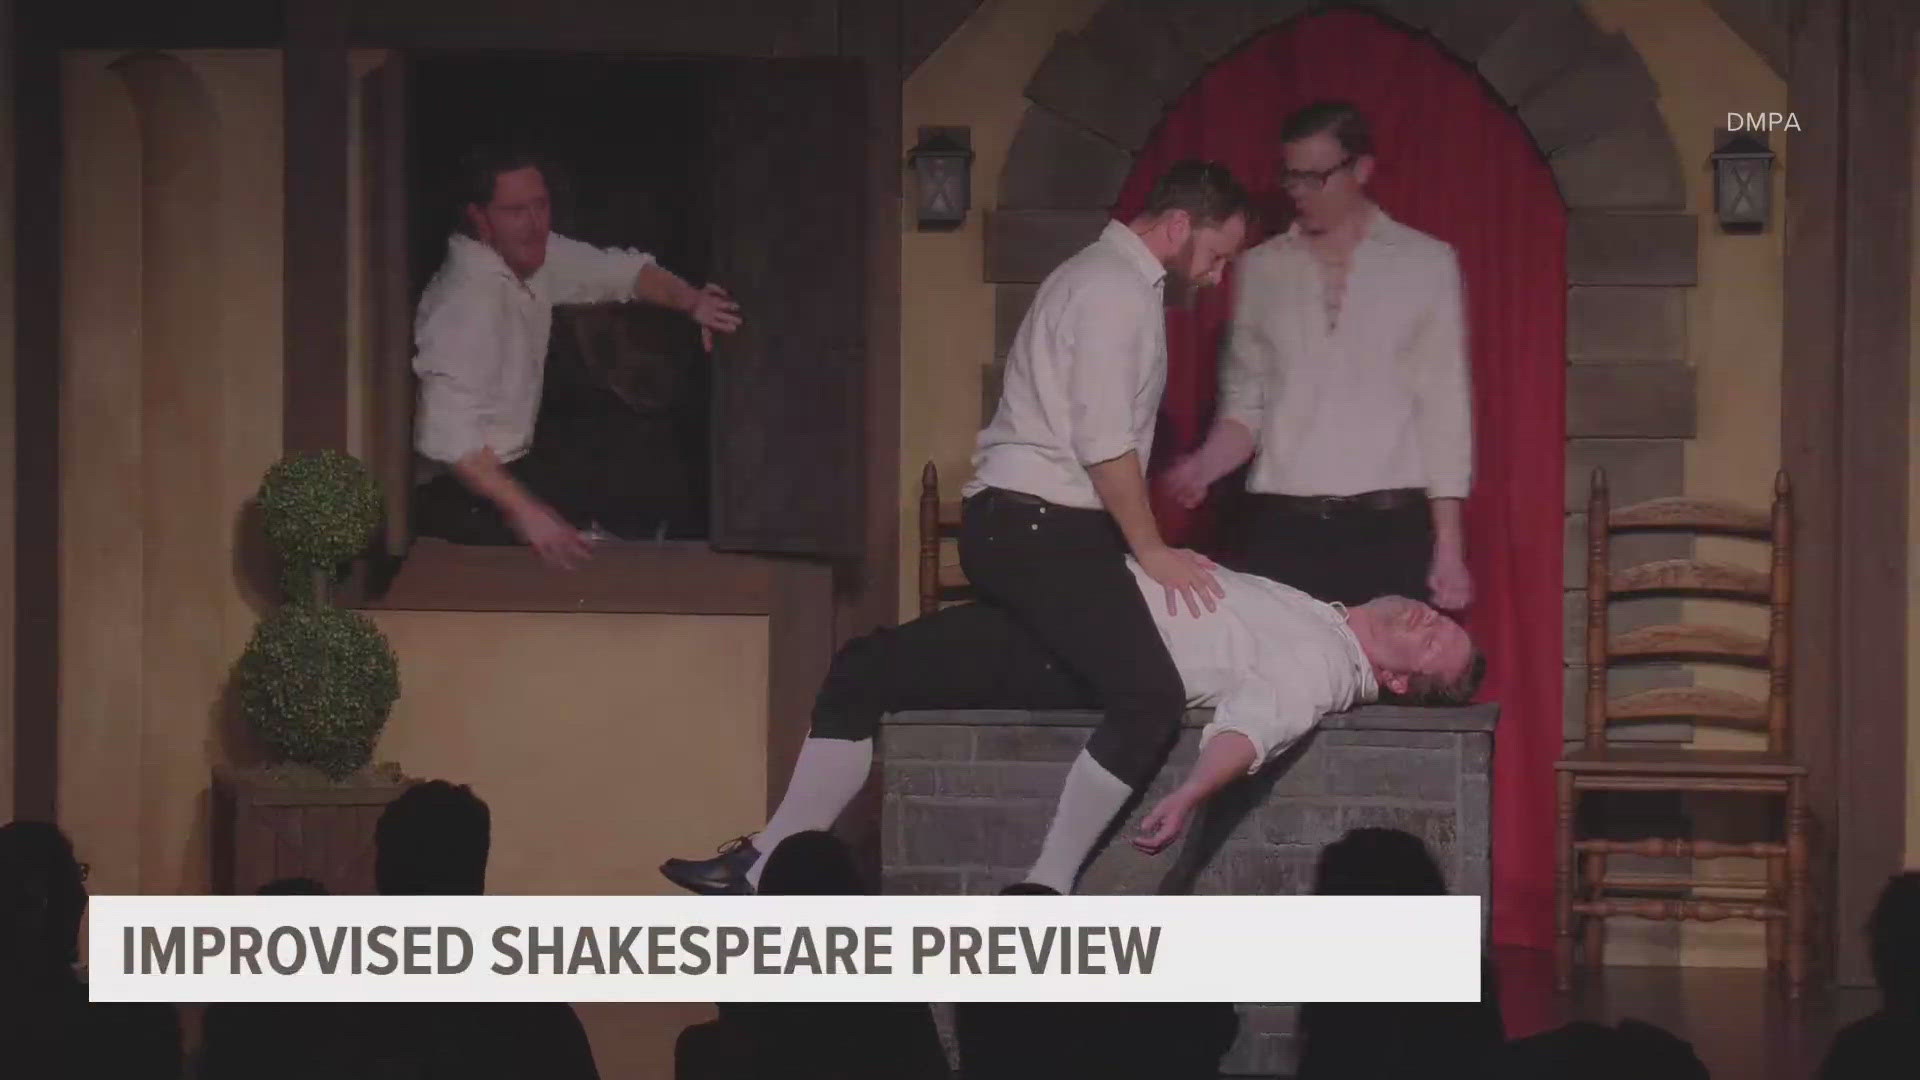 Catch the Improvised Shakespeare Show at Temple Theater April 30 through May 5. Learn more at https://desmoinesperformingarts.org/